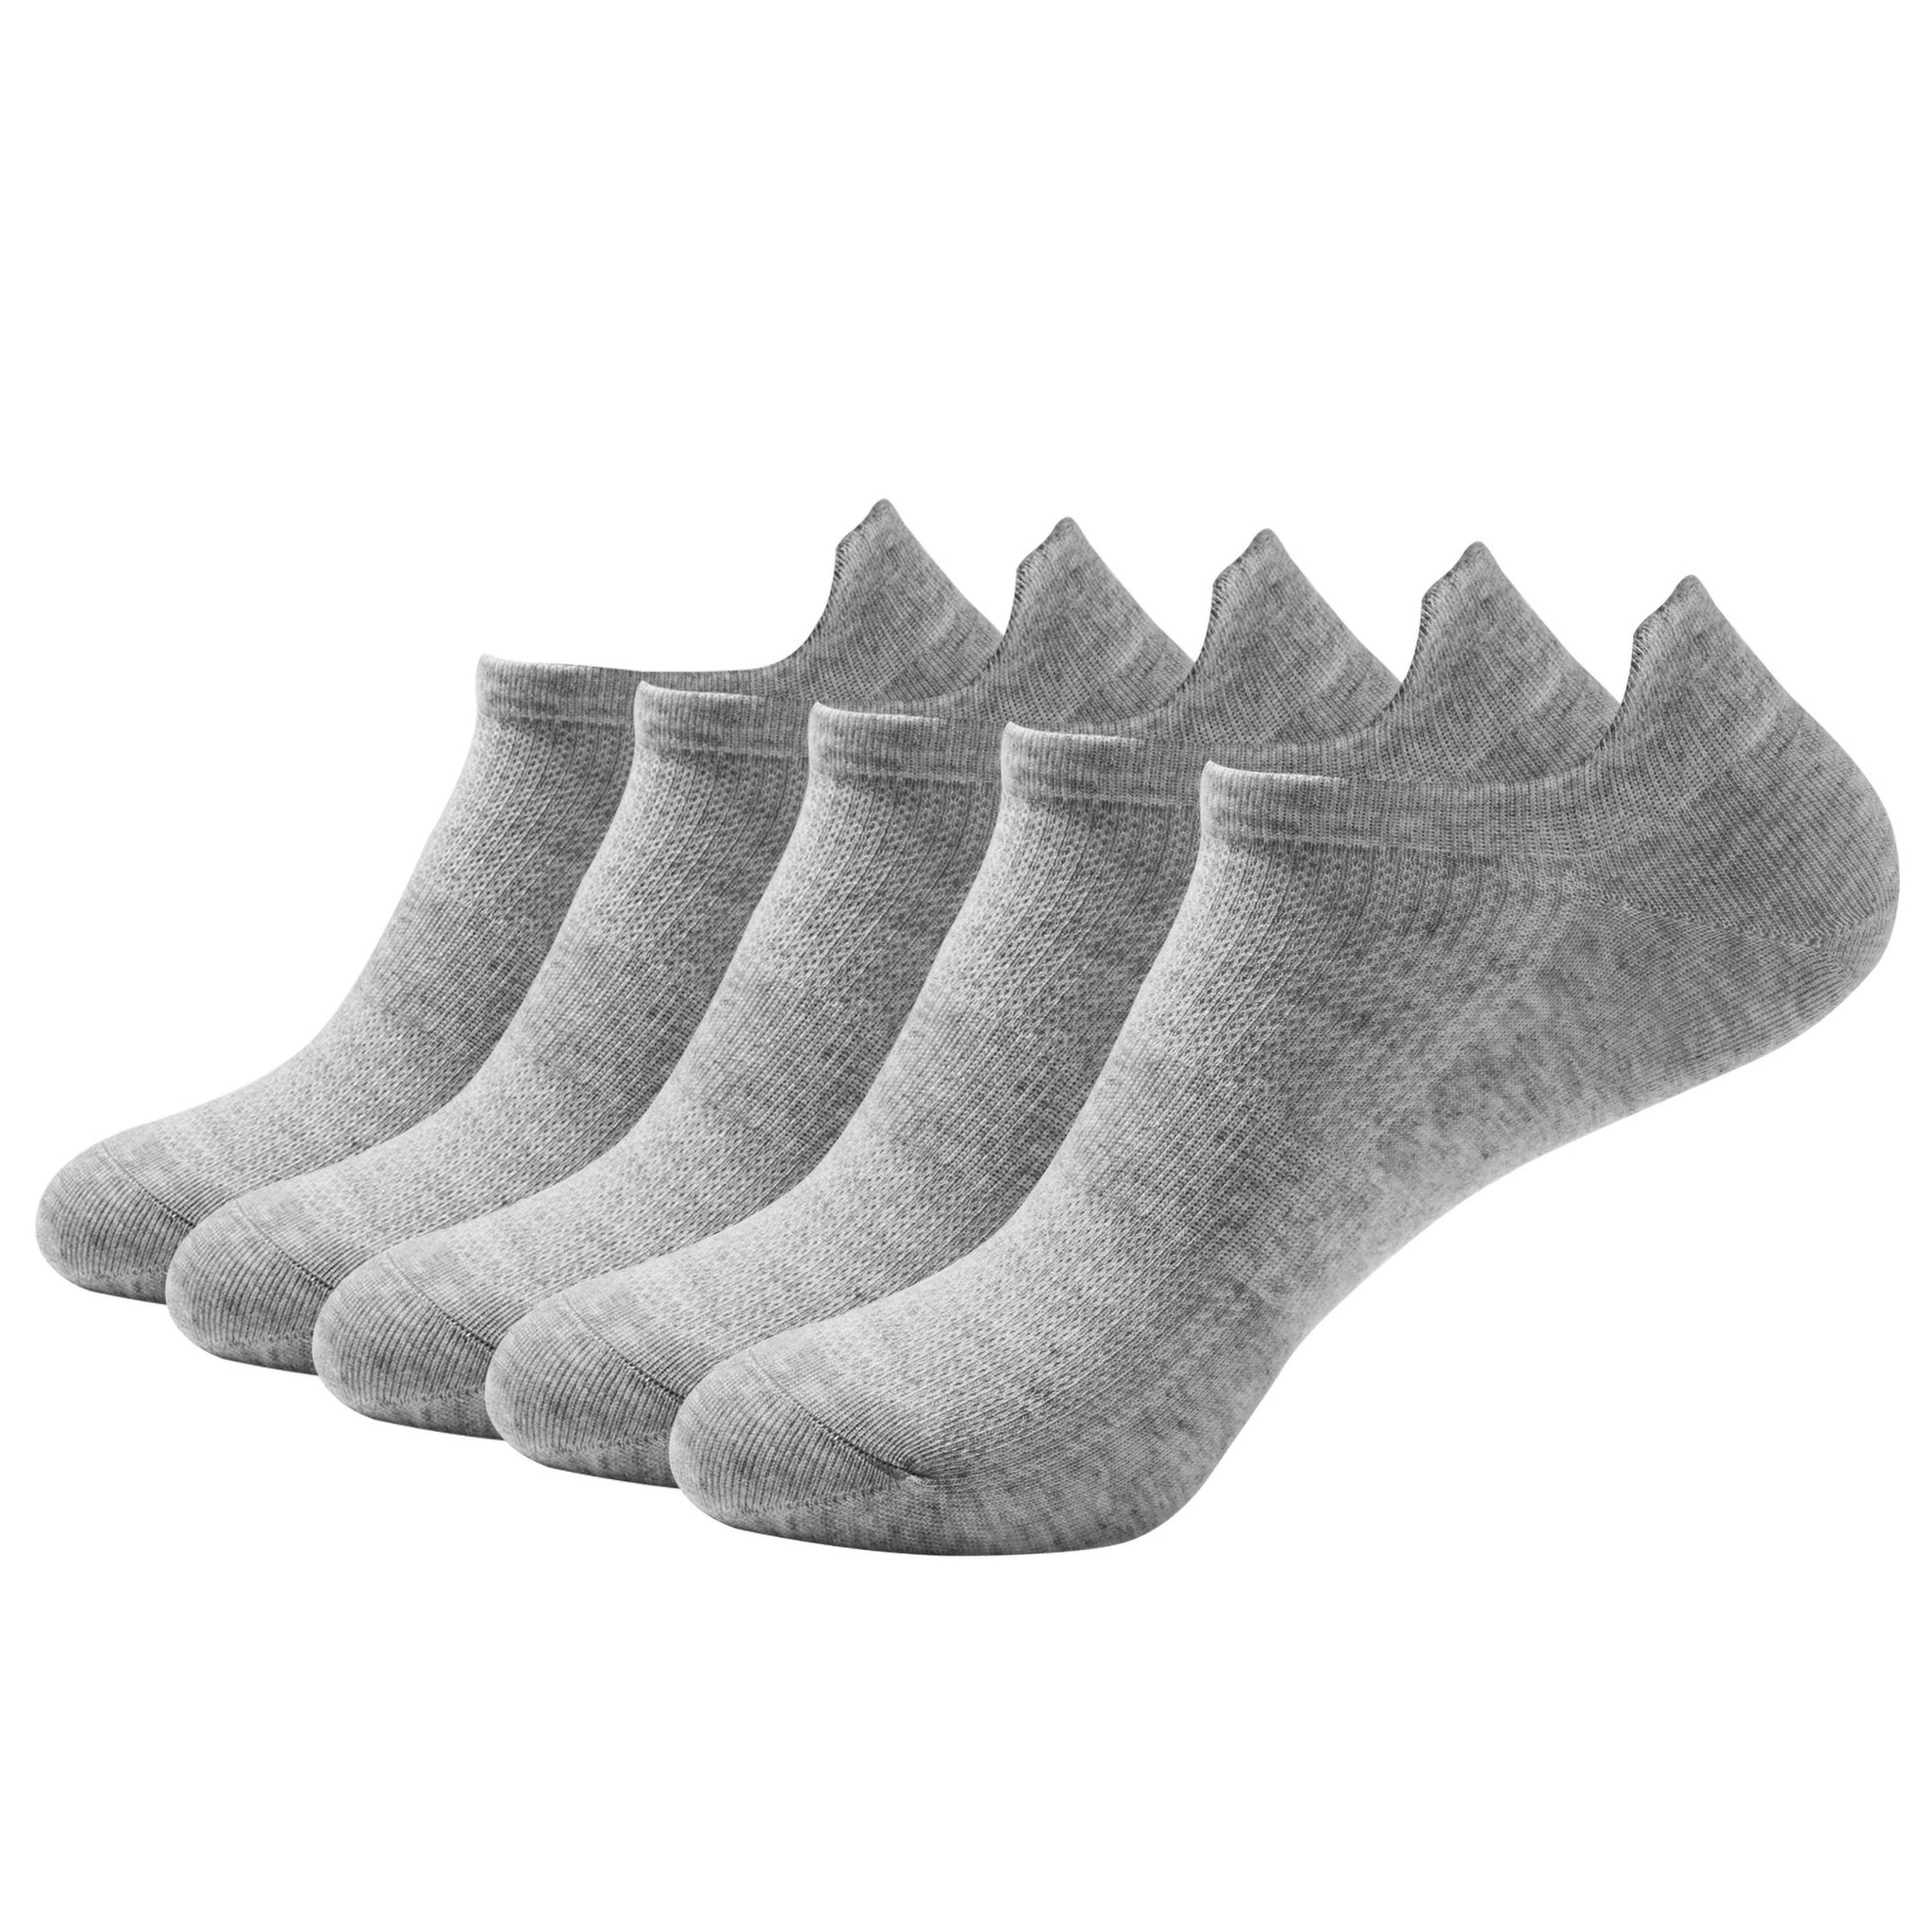 Women Ultra Thin Socks Bamboo Low Cut No Show Ventilating Low Ankle Anti Odor Arch Support Mesh Socks 5 Pairs